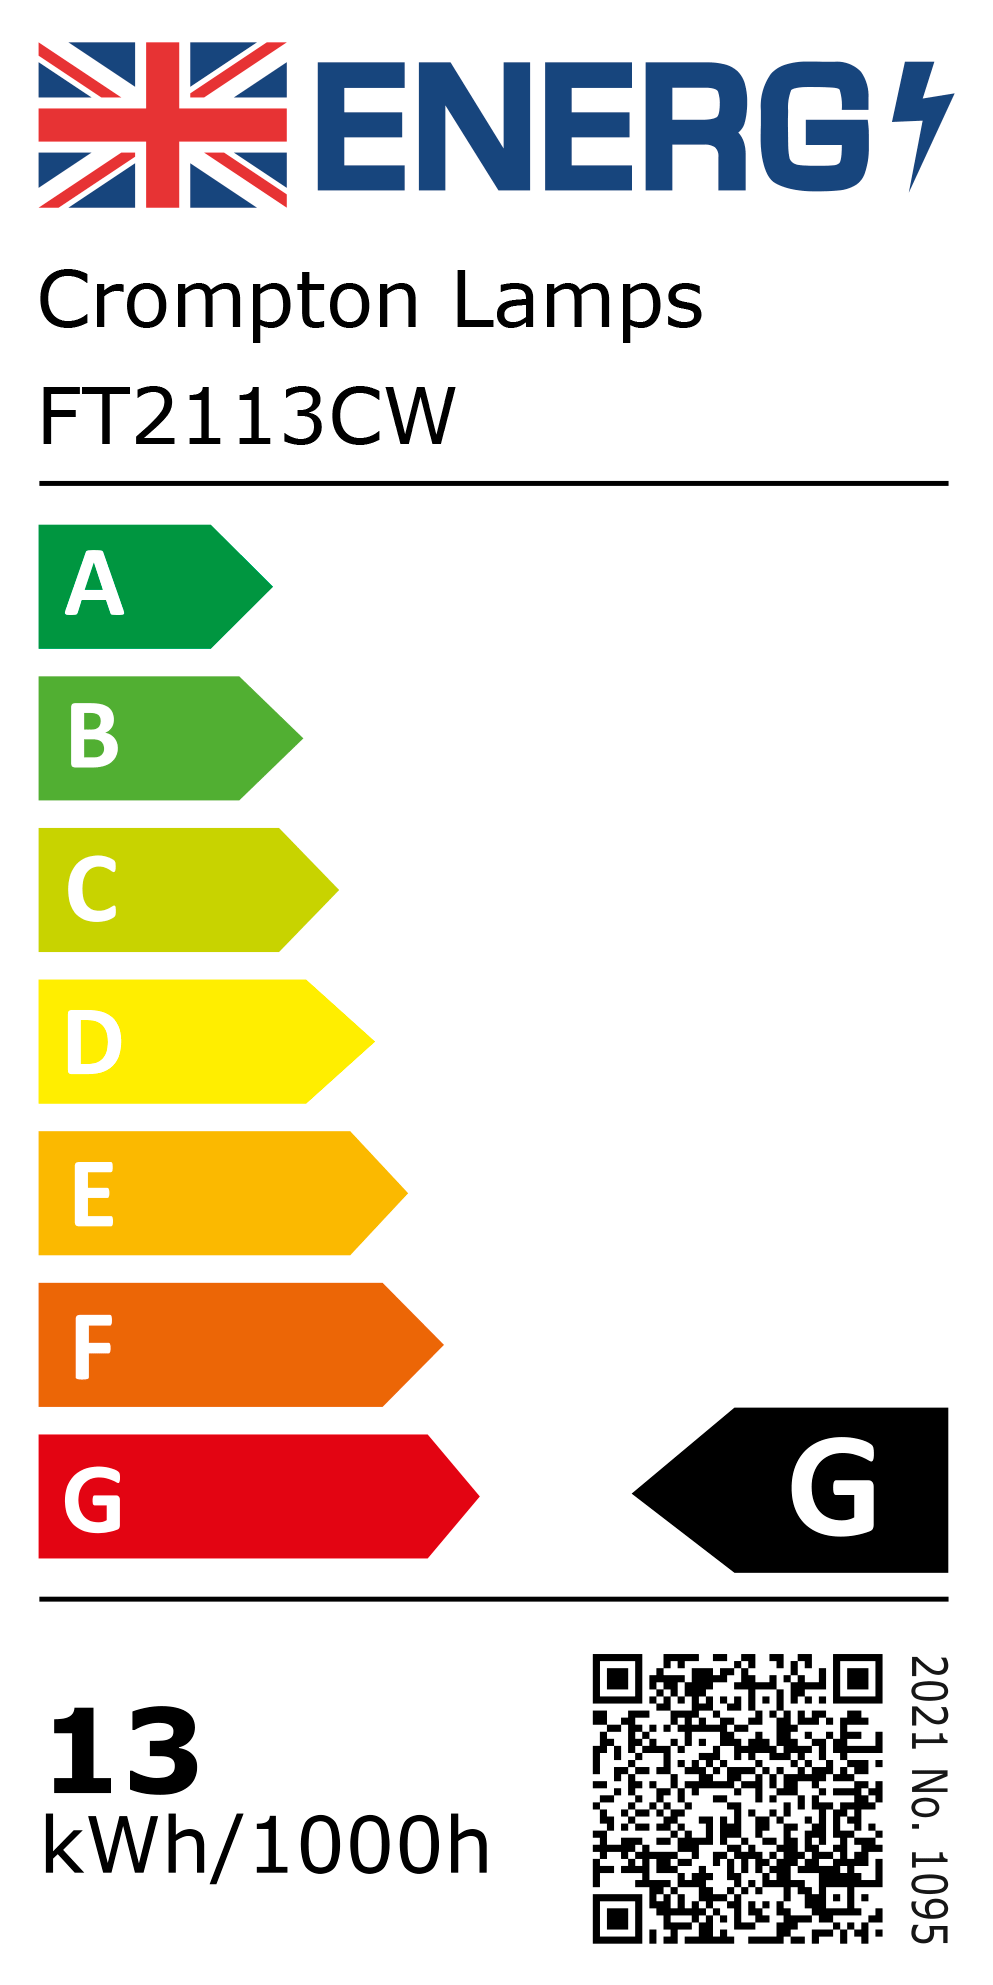 New 2021 Energy Rating Label: MPN FT2113CW